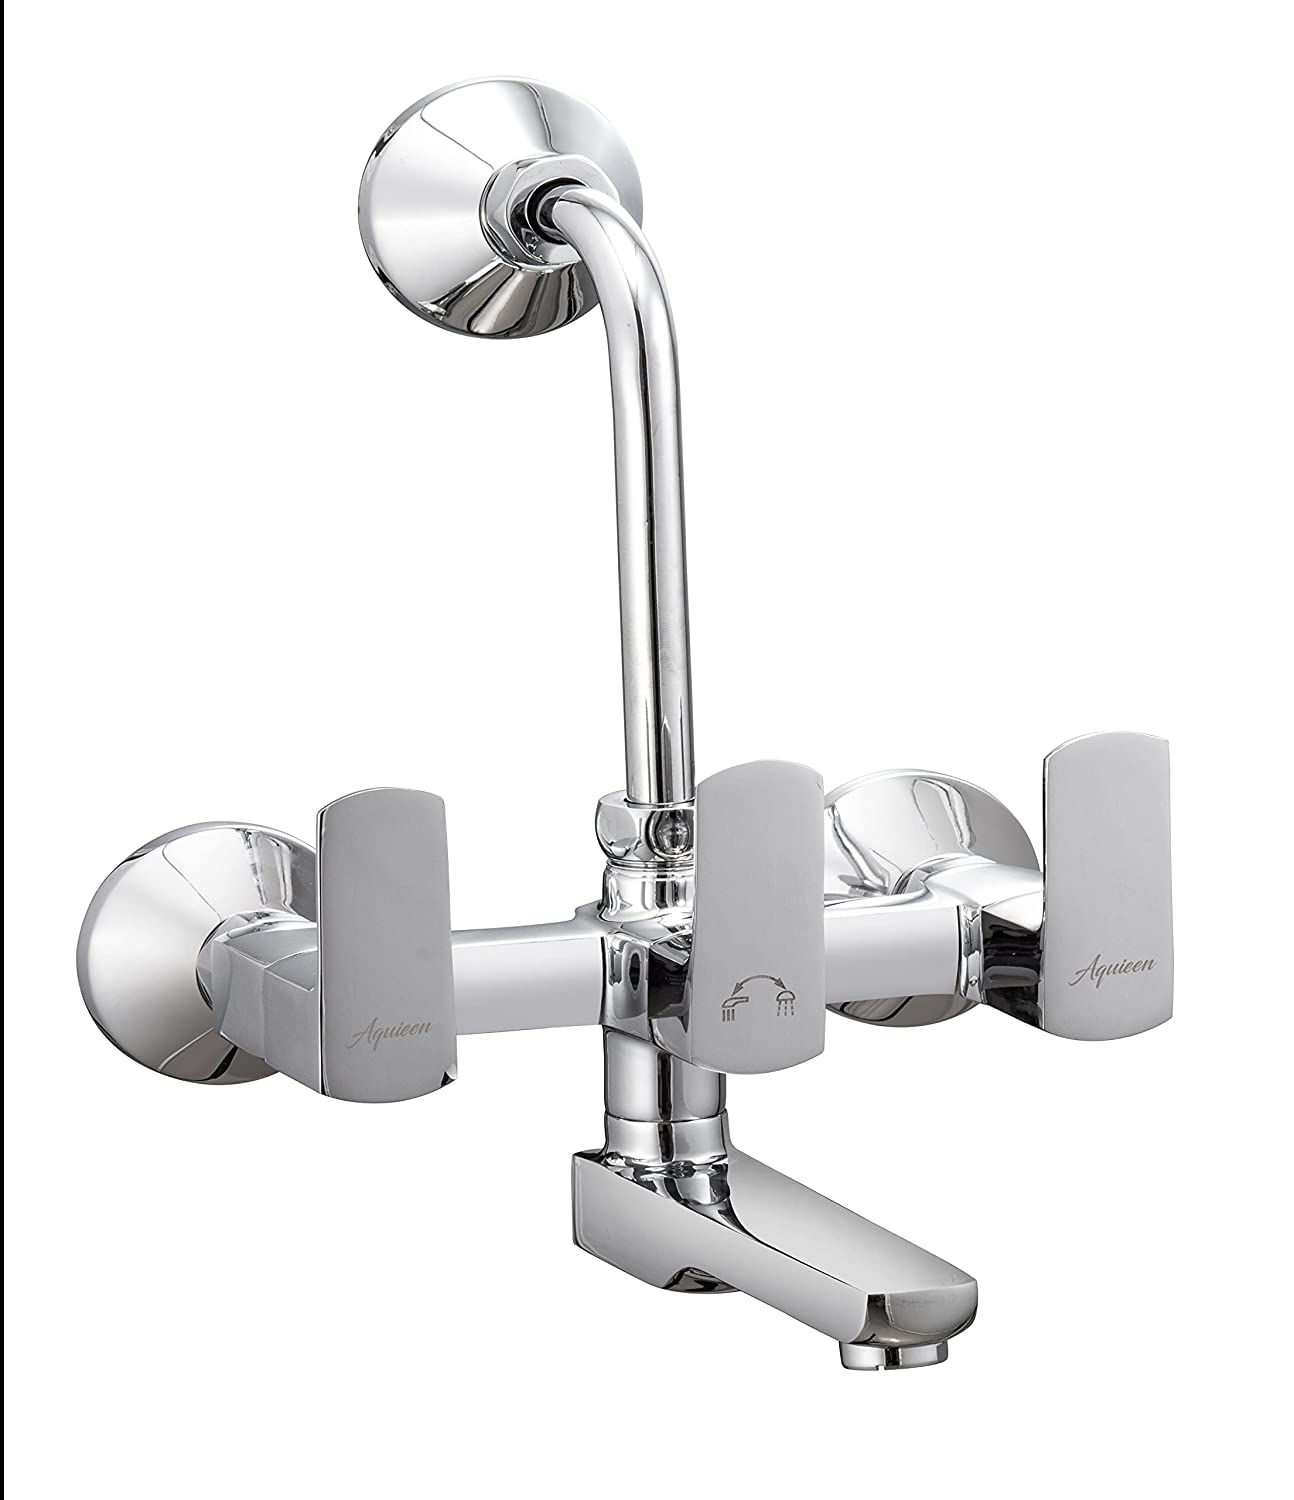 Aquieen Telephonic Wall Mixer with Provision for Overhead Shower with L-Bend and Connecting Legs (Fluid)